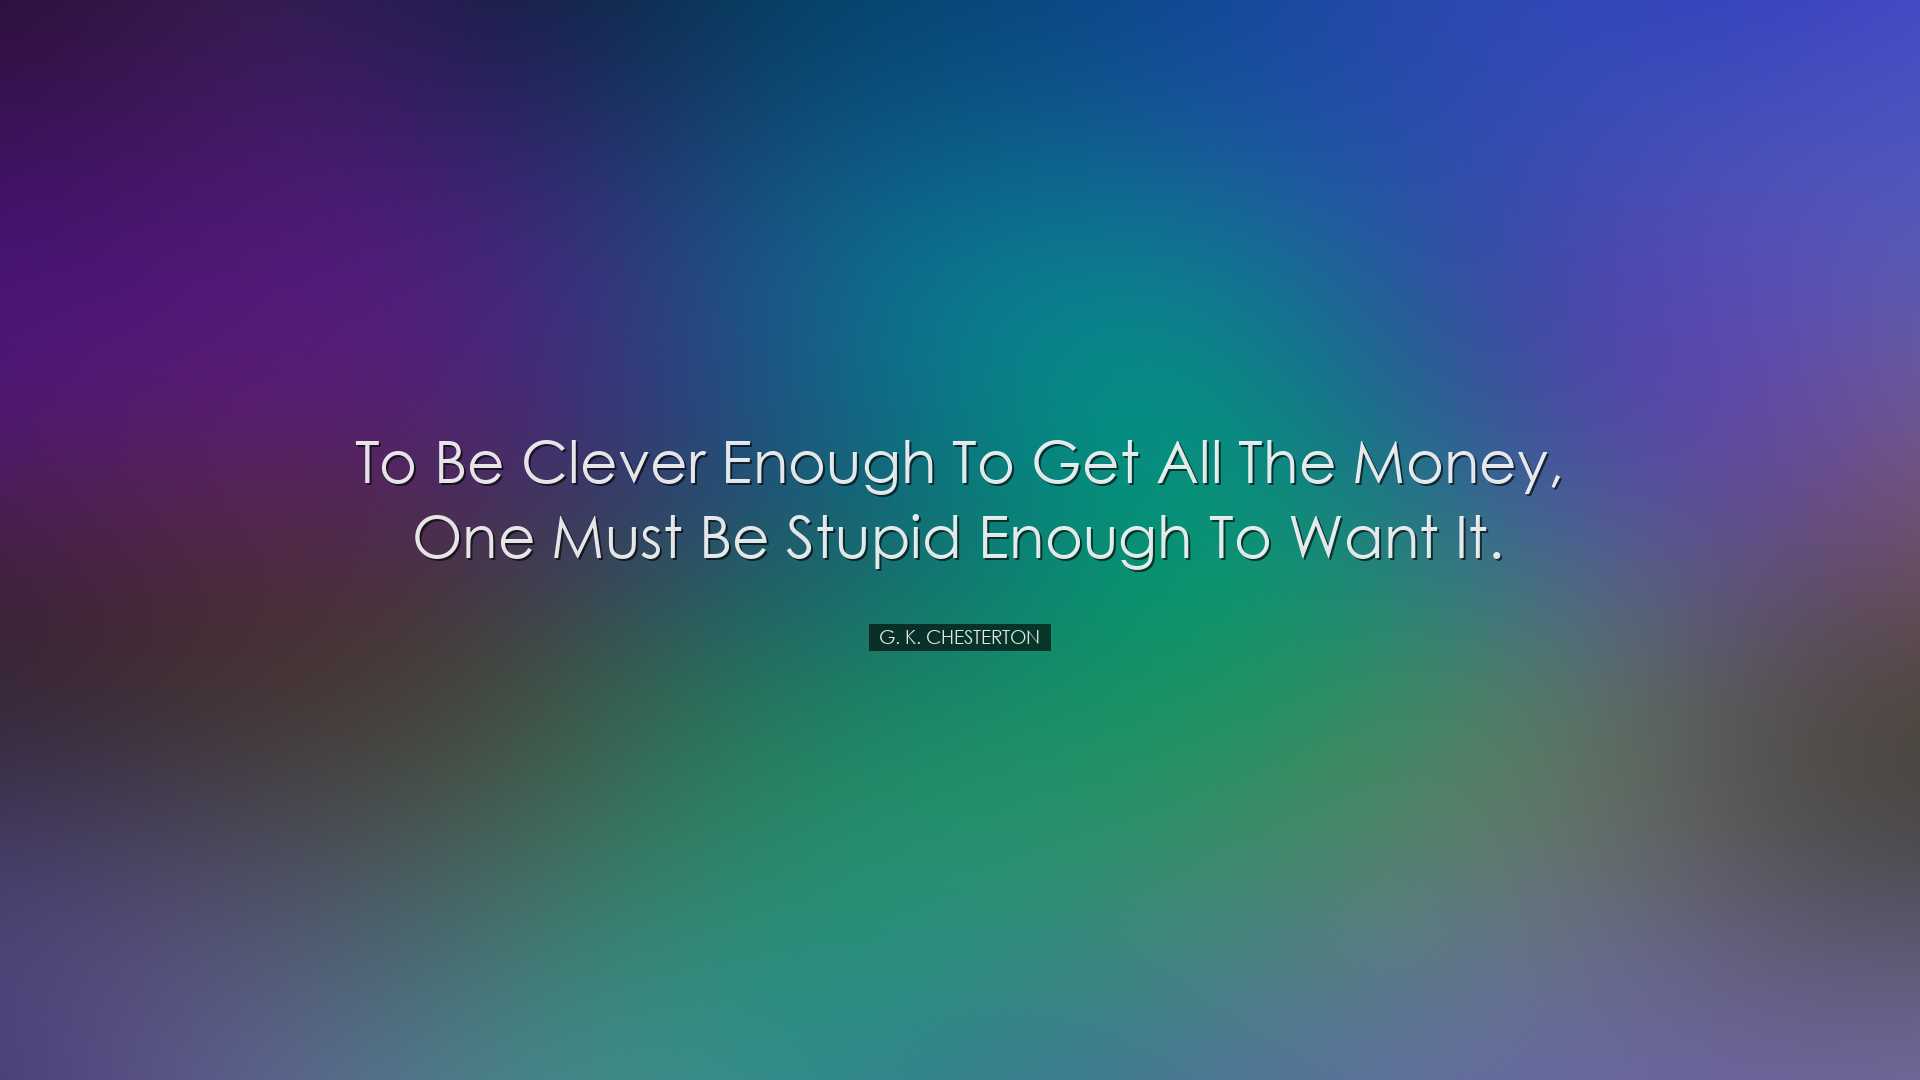 To be clever enough to get all the money, one must be stupid enoug